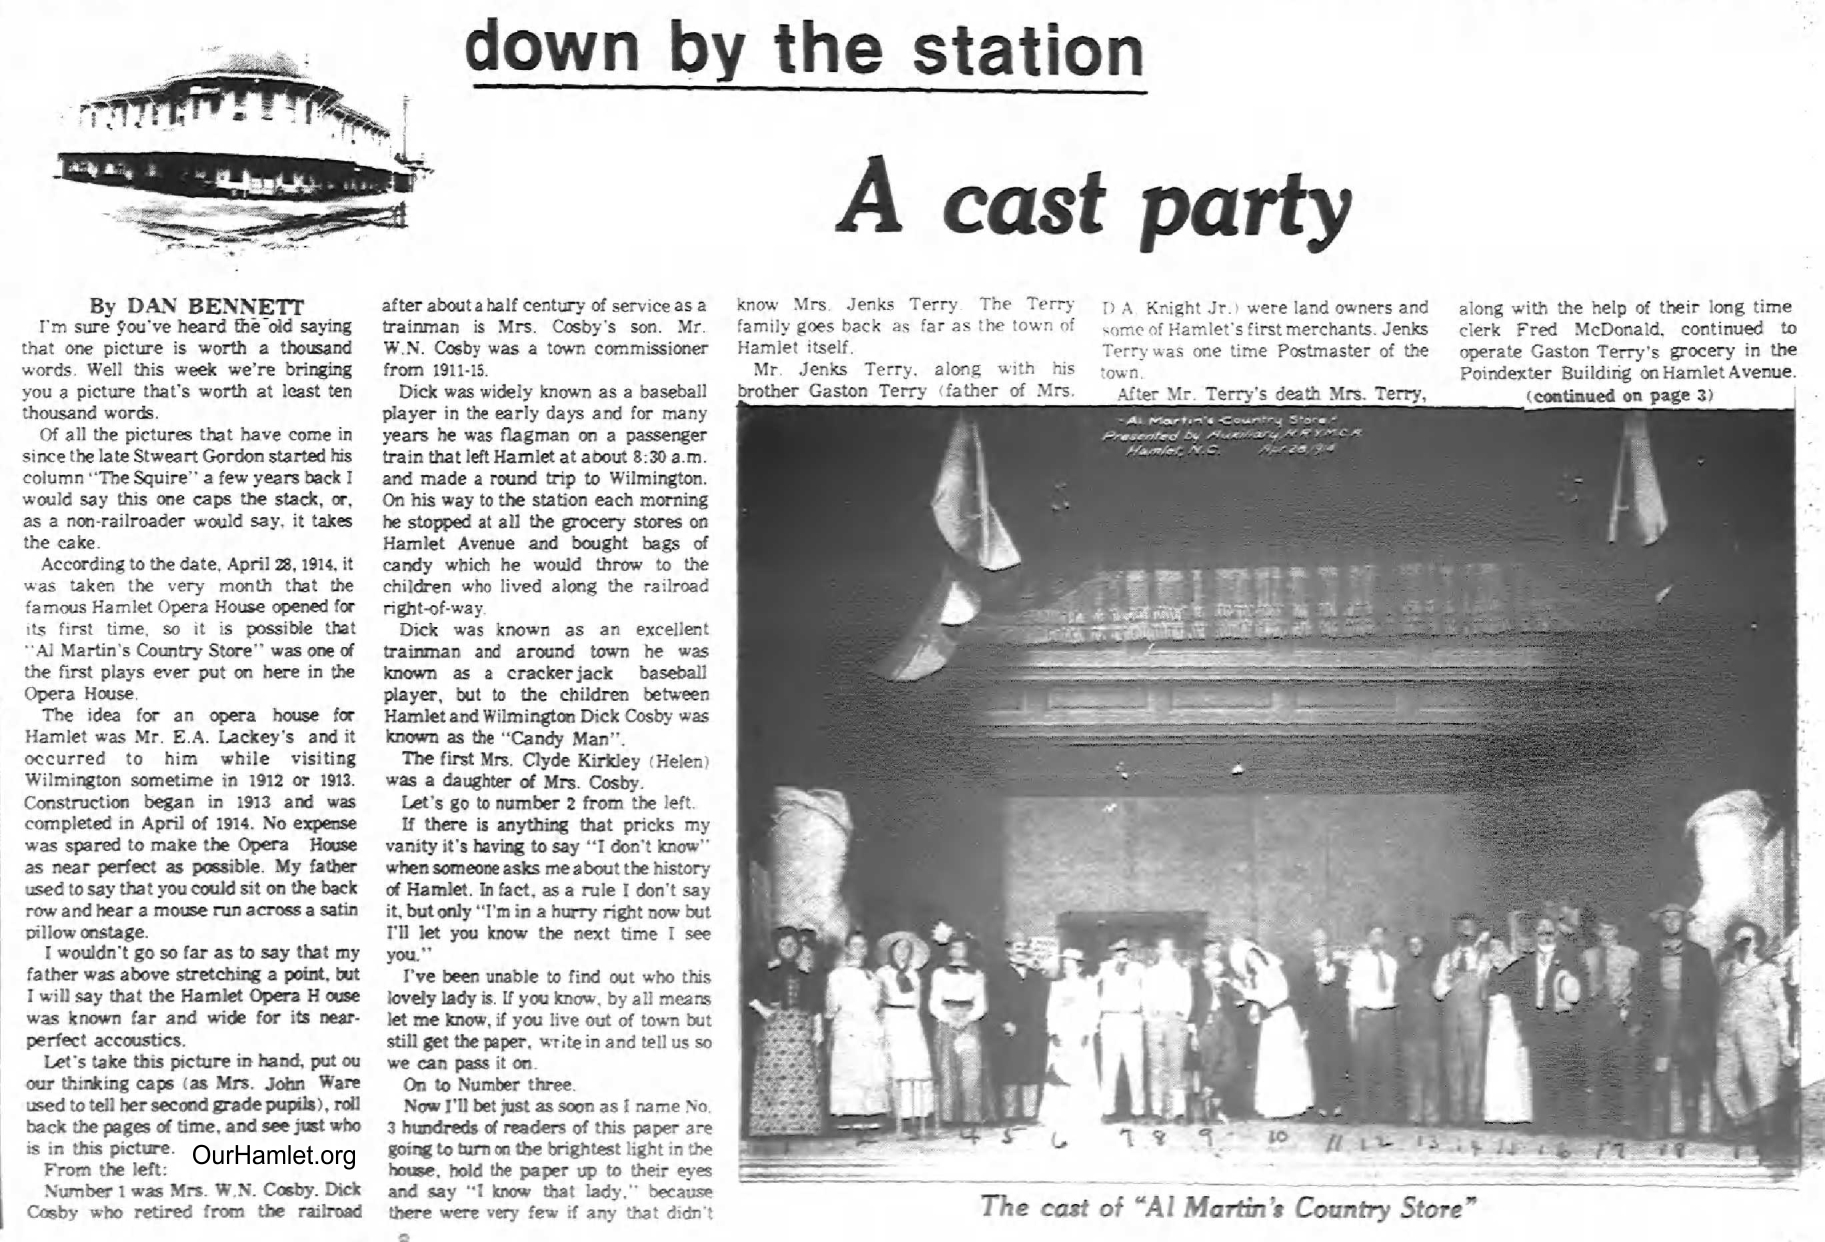 Down by the Station - A Cast Party a OH.jpg